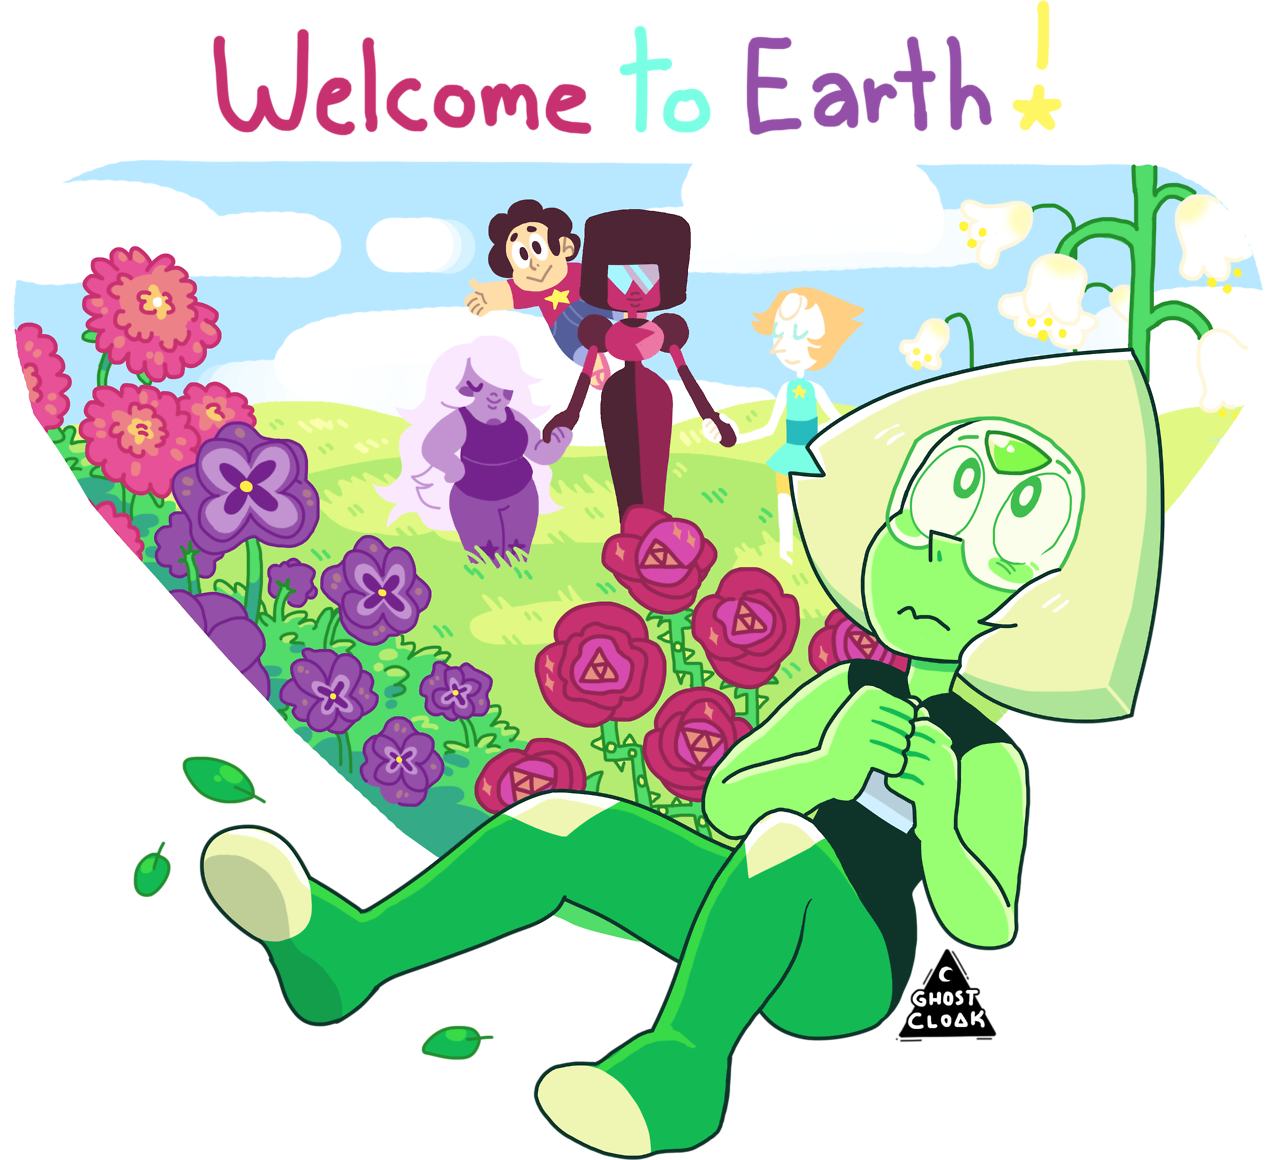 more su stuff! i really loved the peridot redemption arc art by me ☾